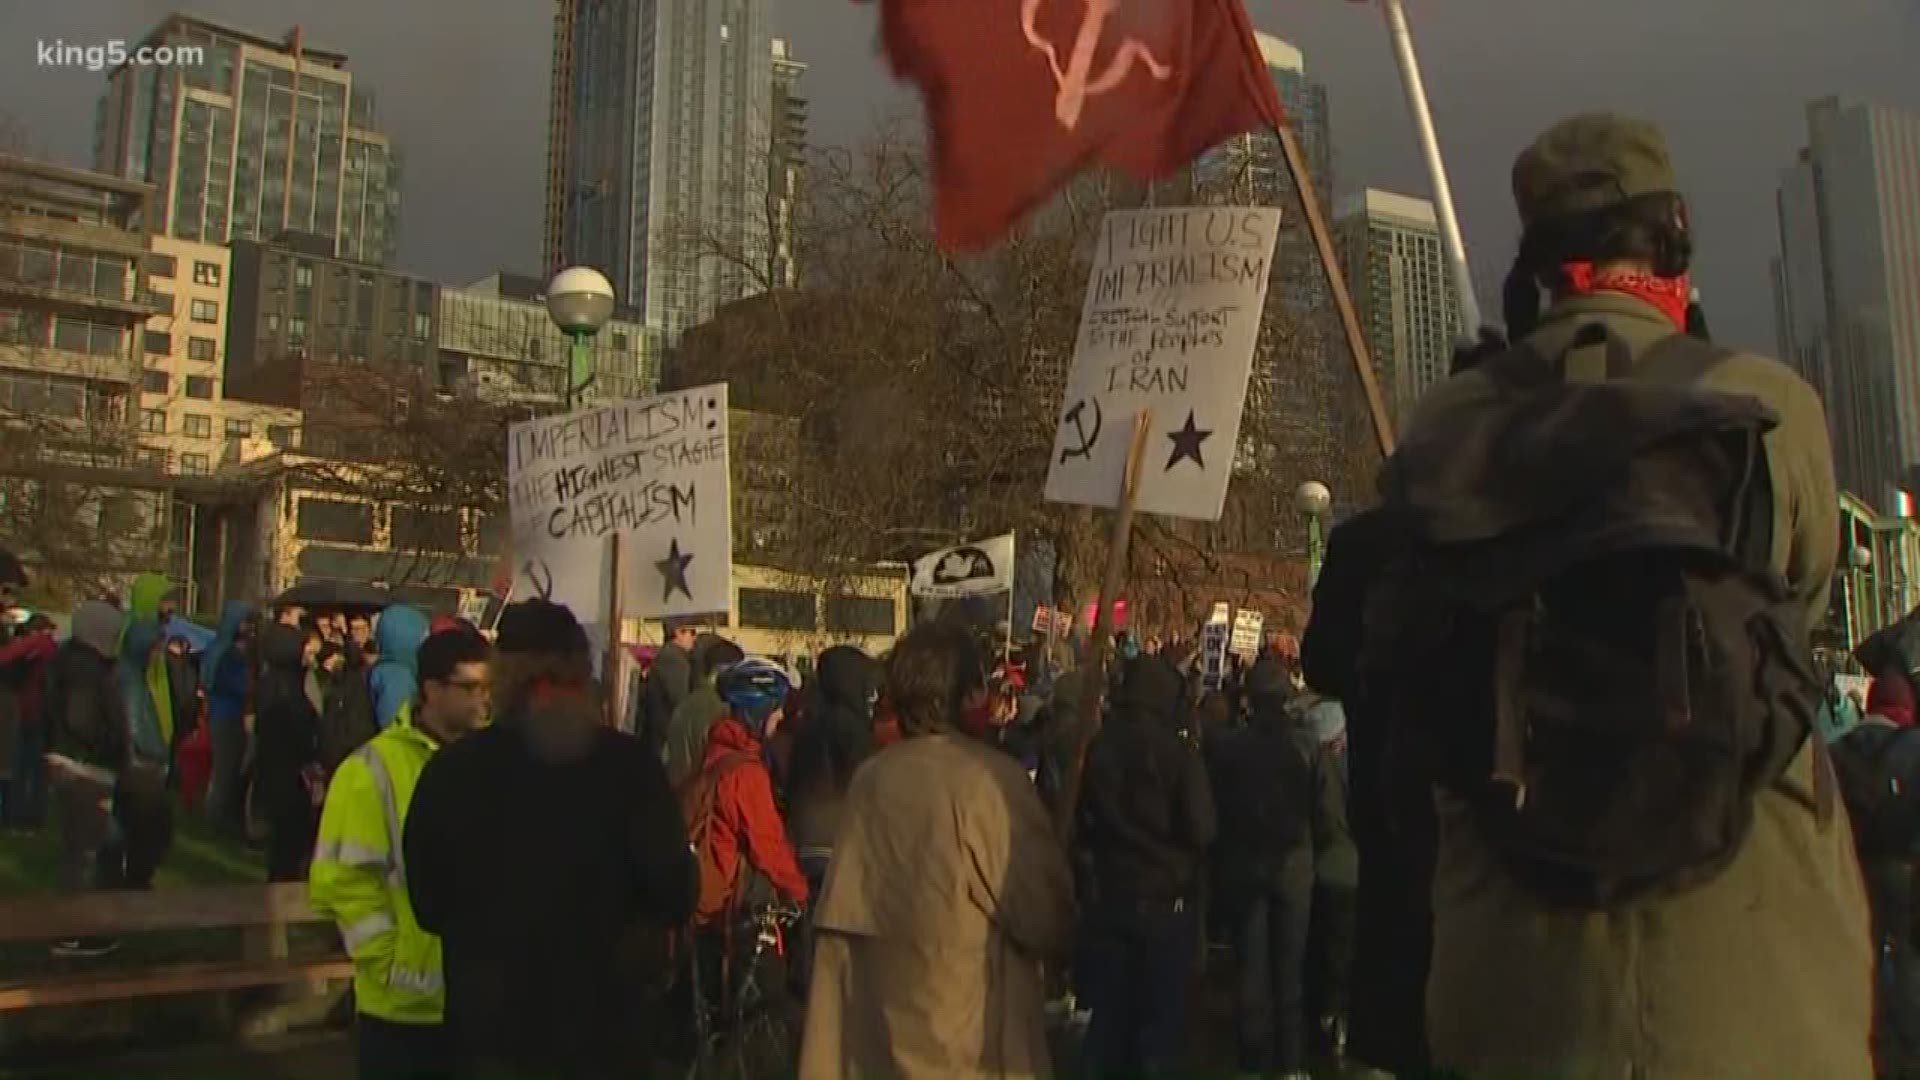 The Seattle demonstration was just one of several that happened across the country Saturday protesting President Trump's decision to initiate an airstrike on Iran.